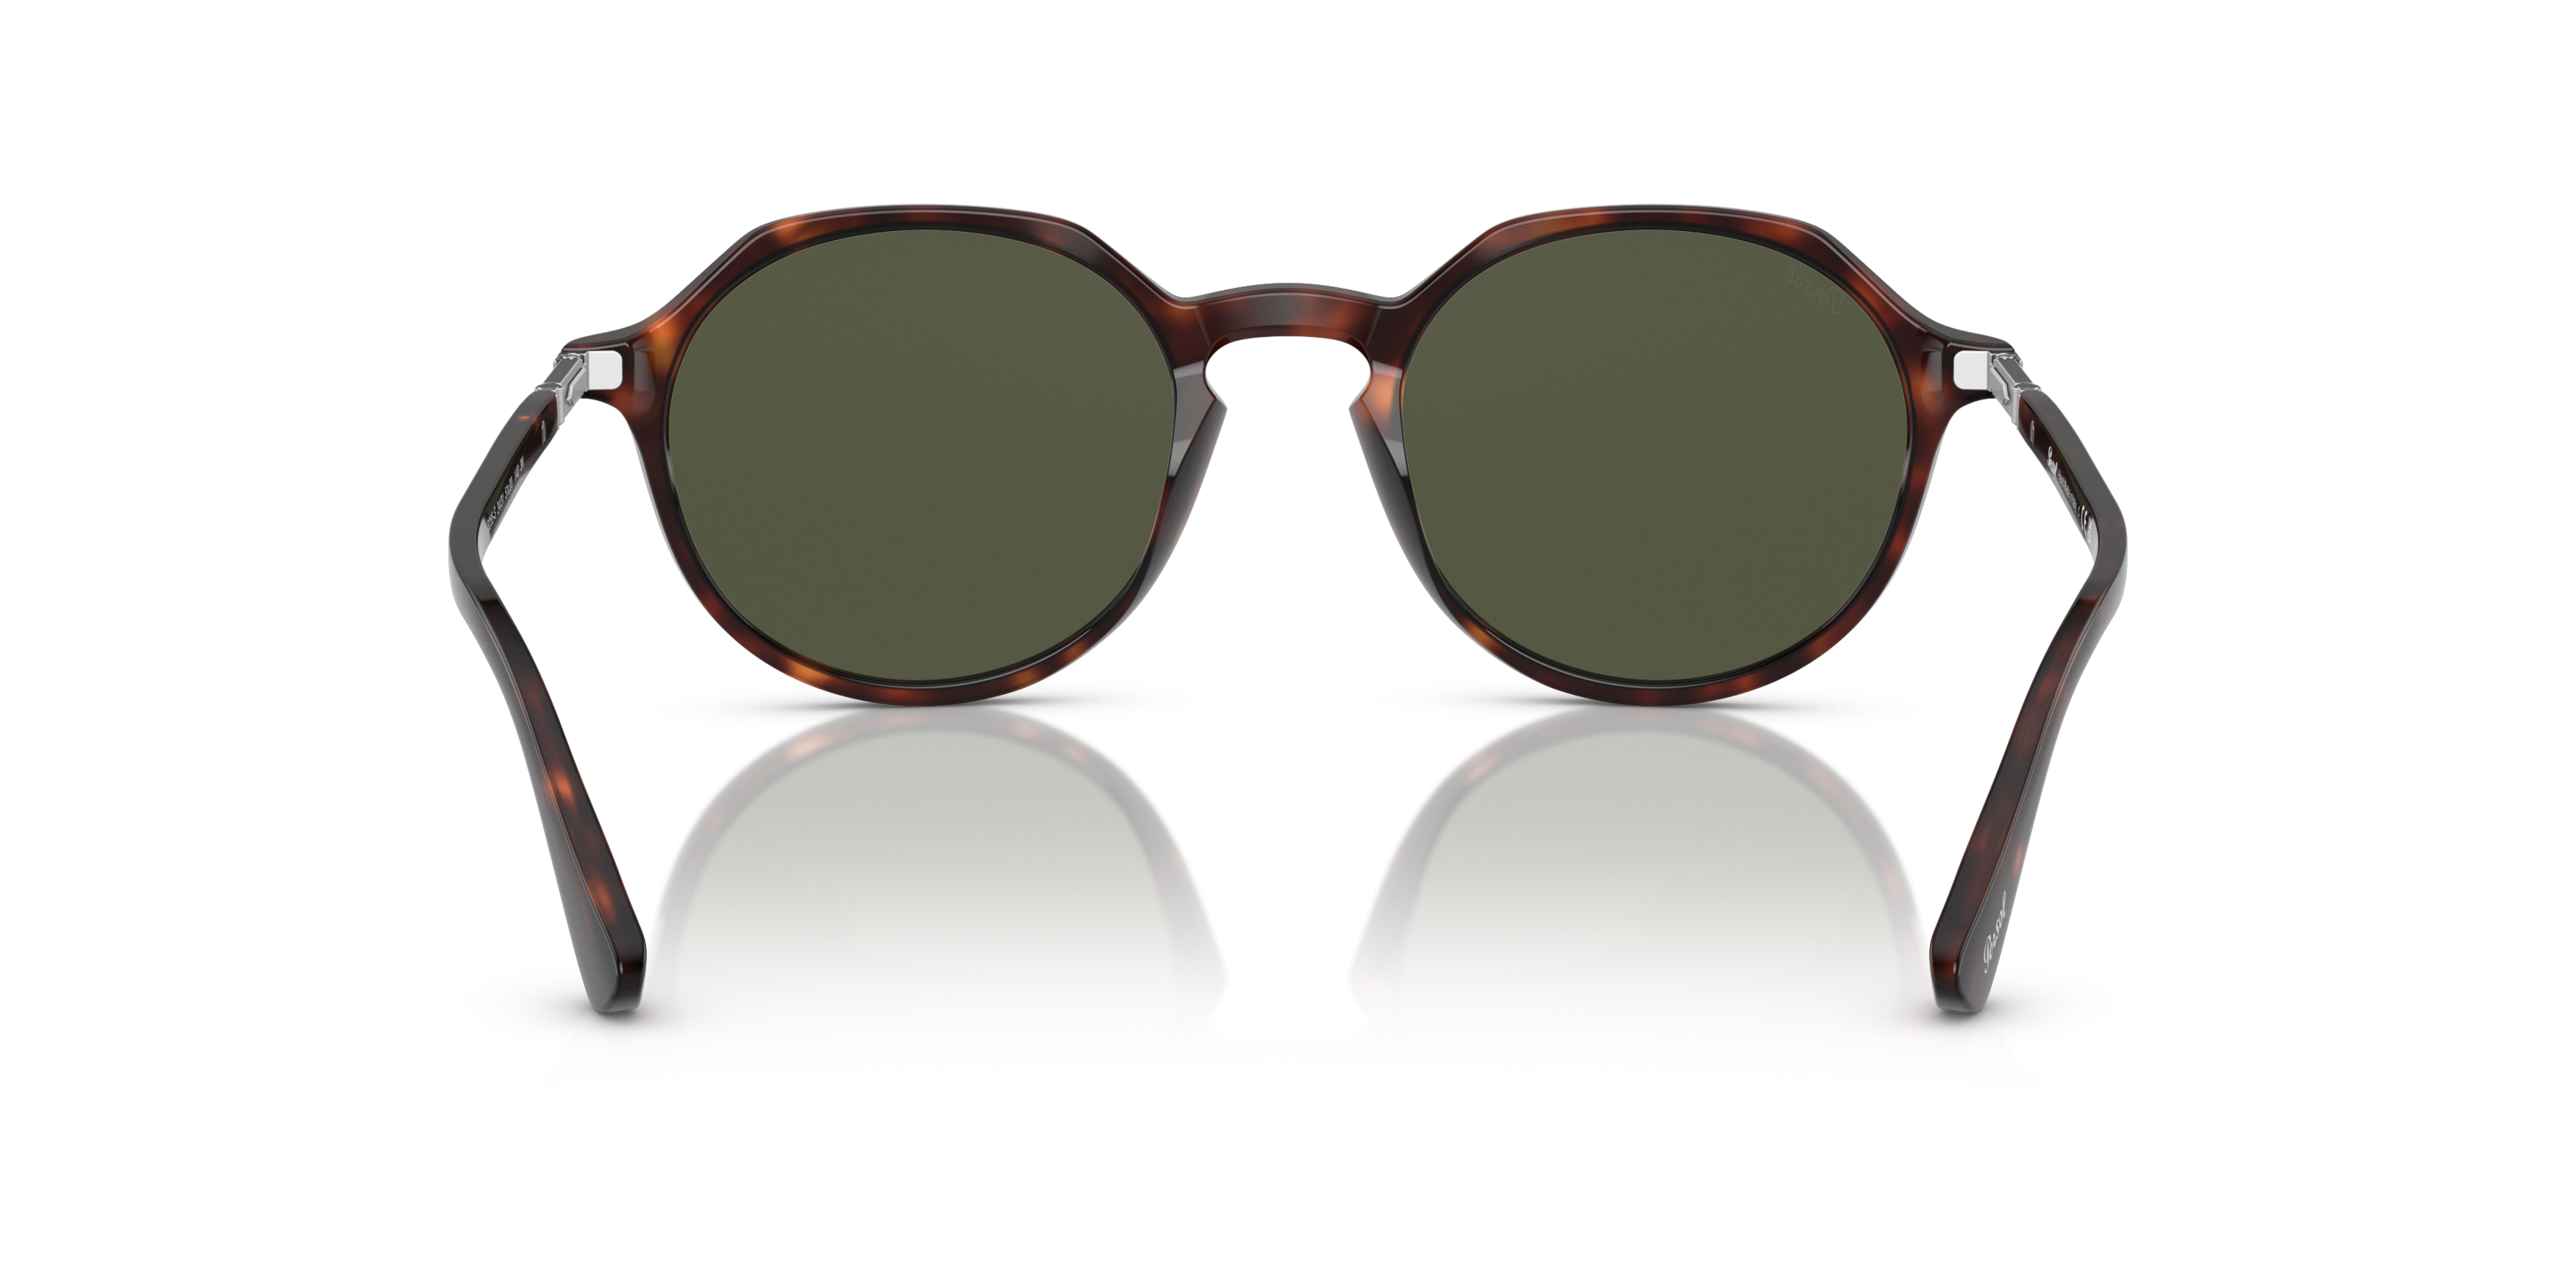 [products.image.detail02] PERSOL PO3255S 24/31